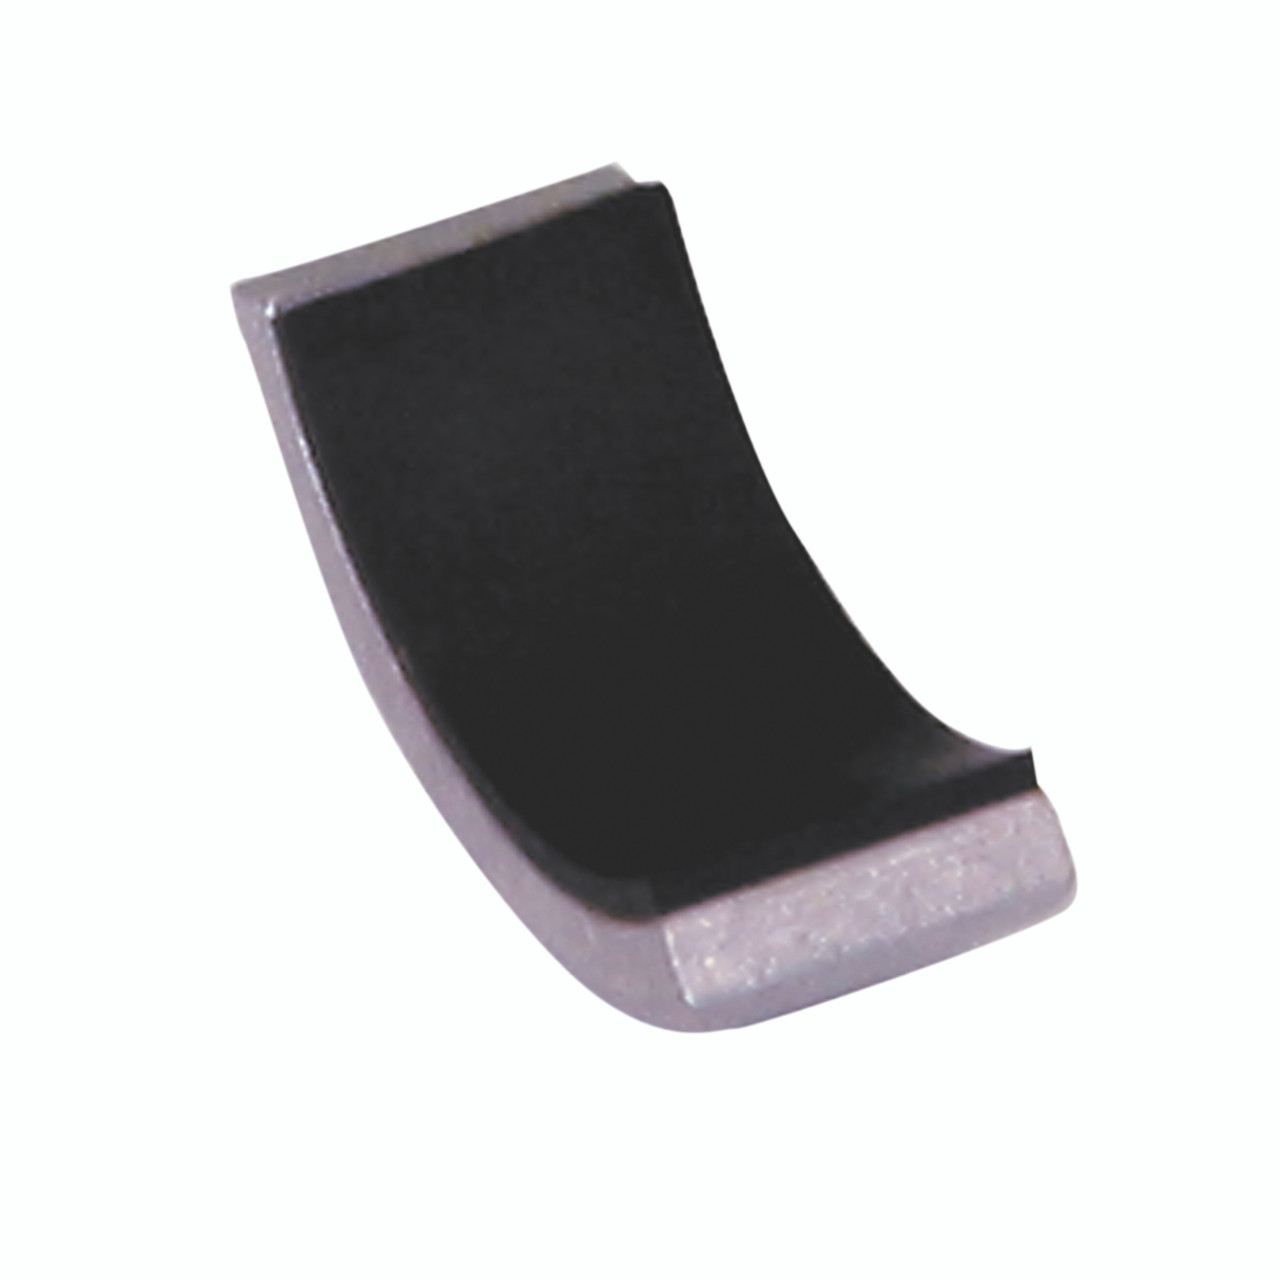 Baseline¨ MMT - Accessory - Small Curved Push Pad